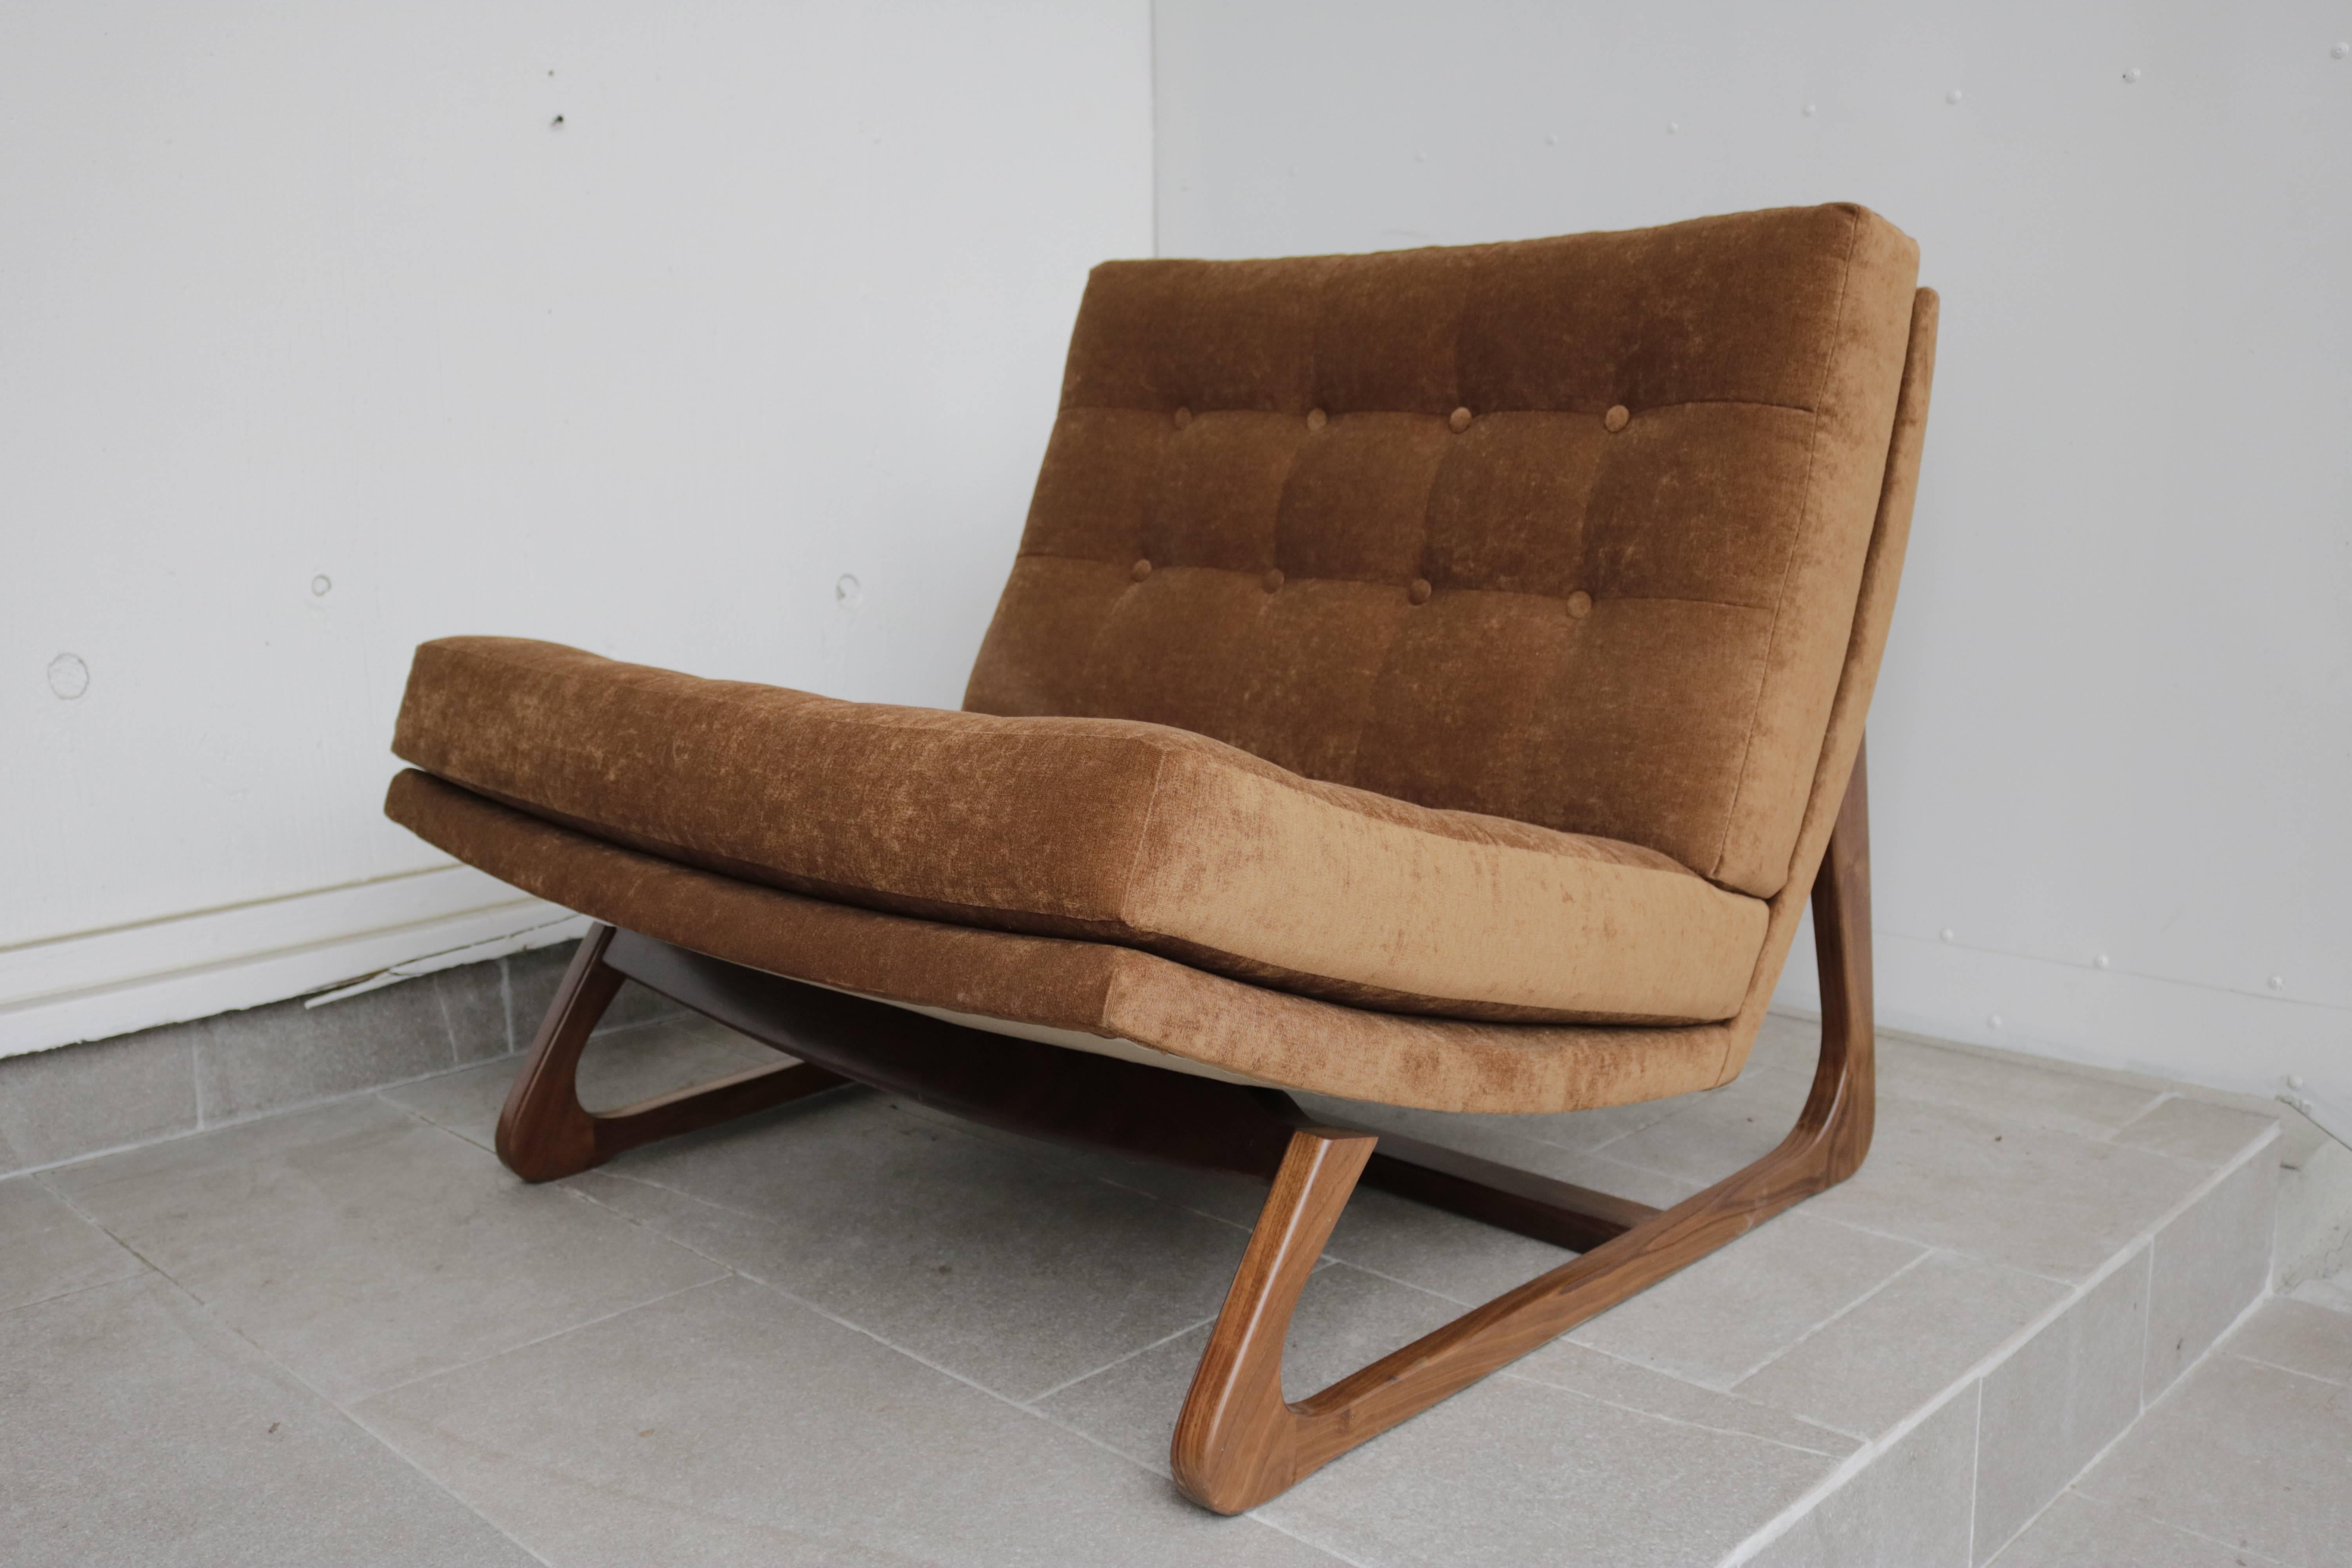 1960s Adrian Pearsall slipper chair with a sculptural teak base and tufted seat and back. Reupholstered in caramel tone chenille. Seat height is 12.5